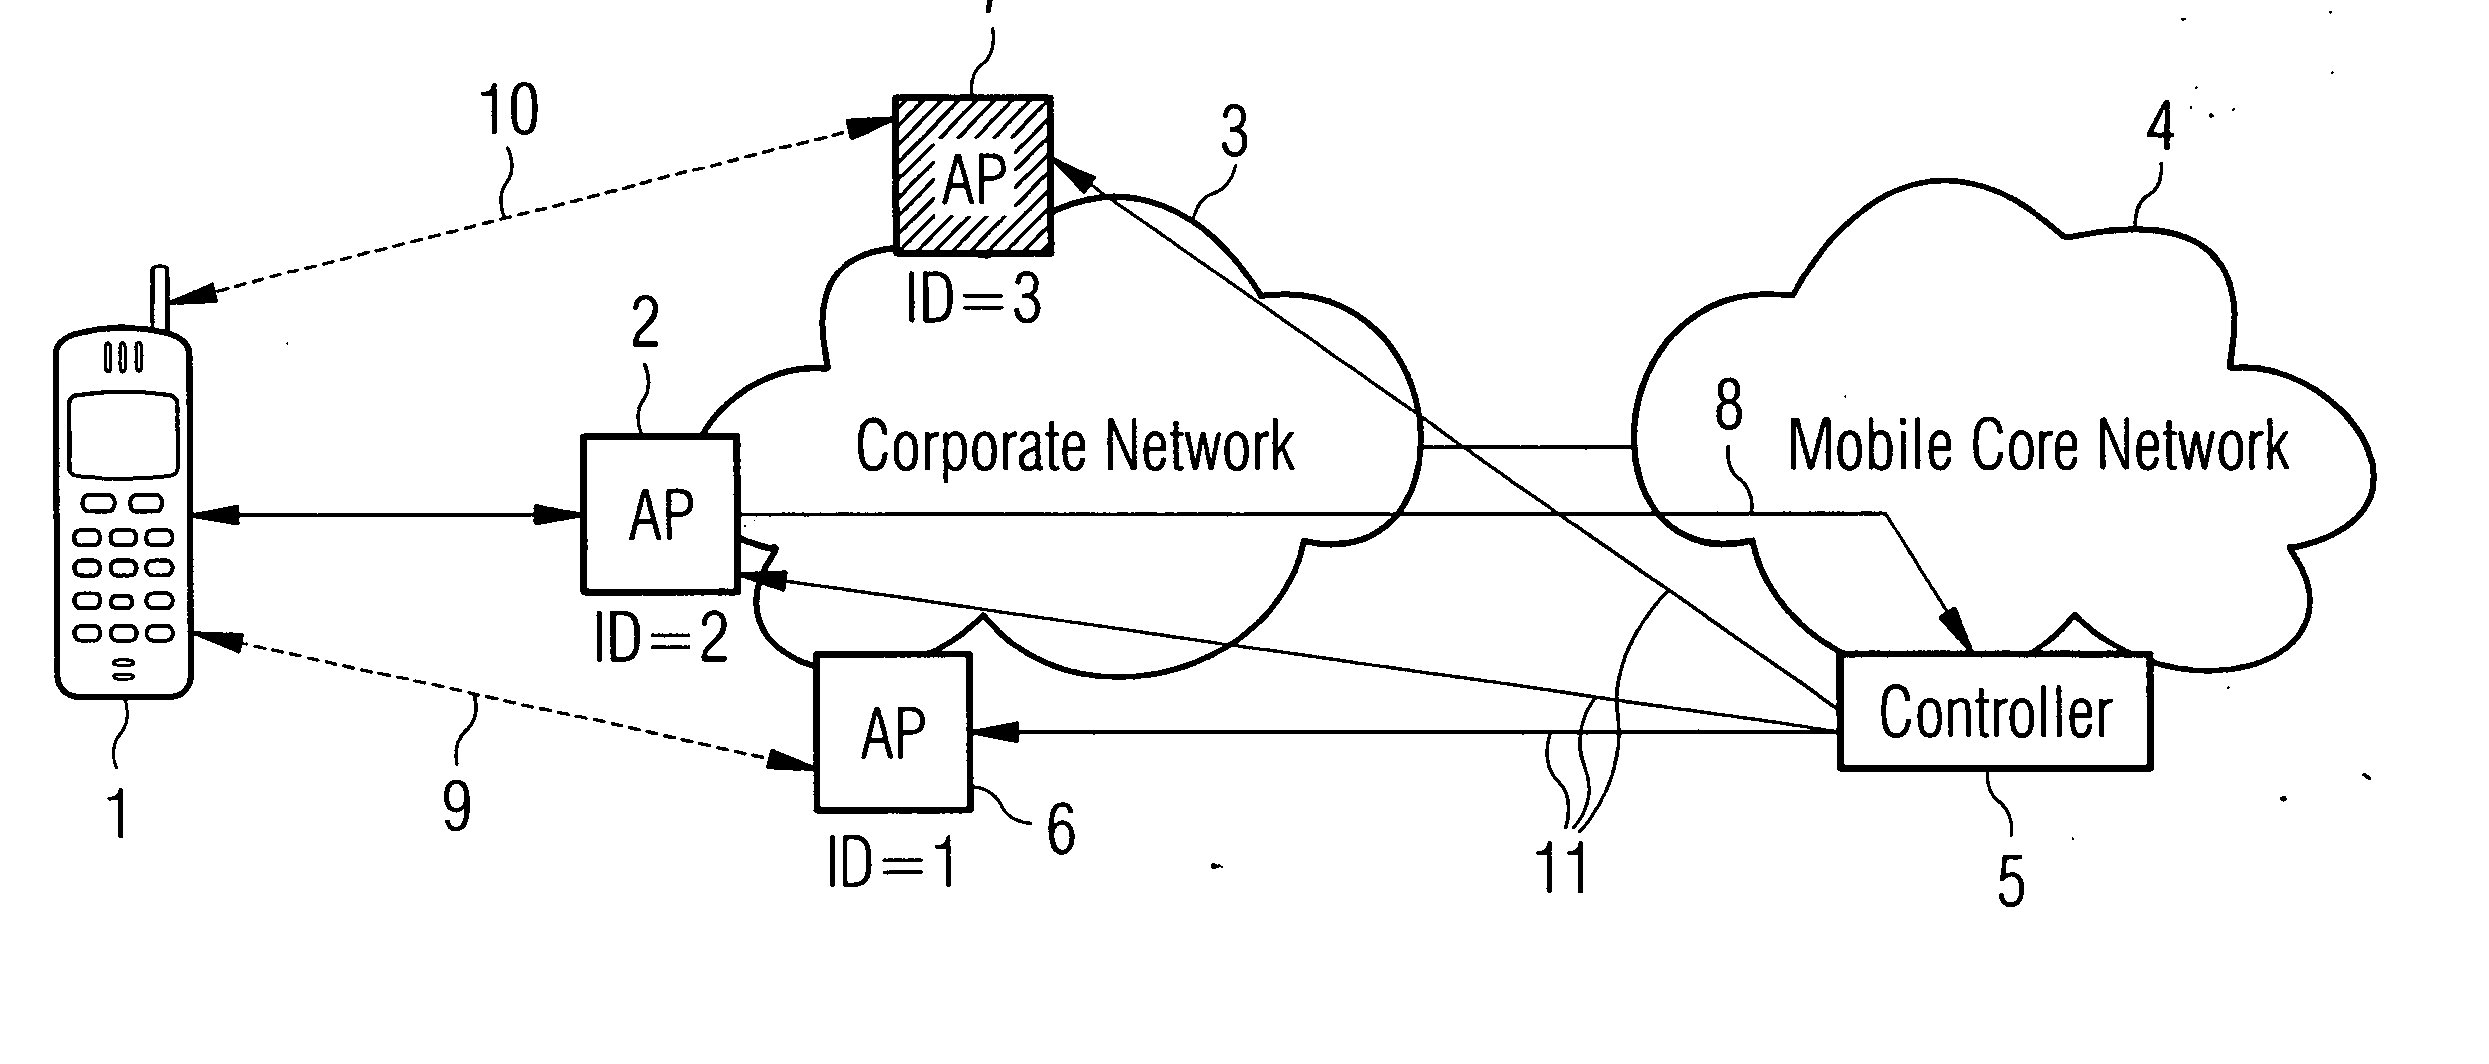 Method of verifying integrity of an access point on a wireless network